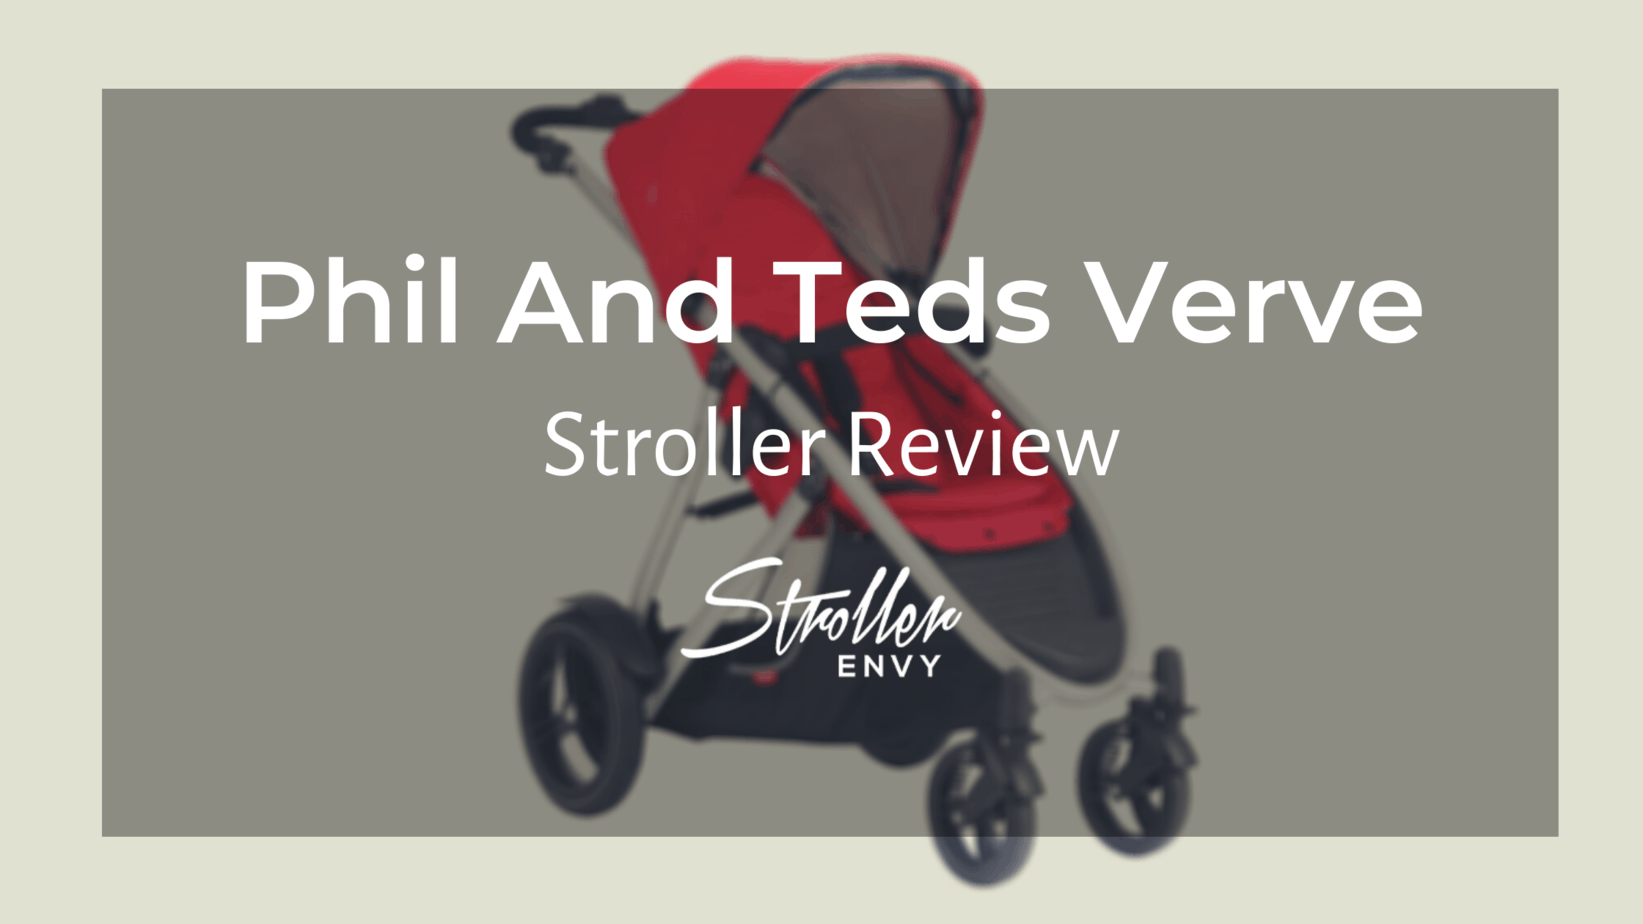 Phil And Teds Verve Stroller Review